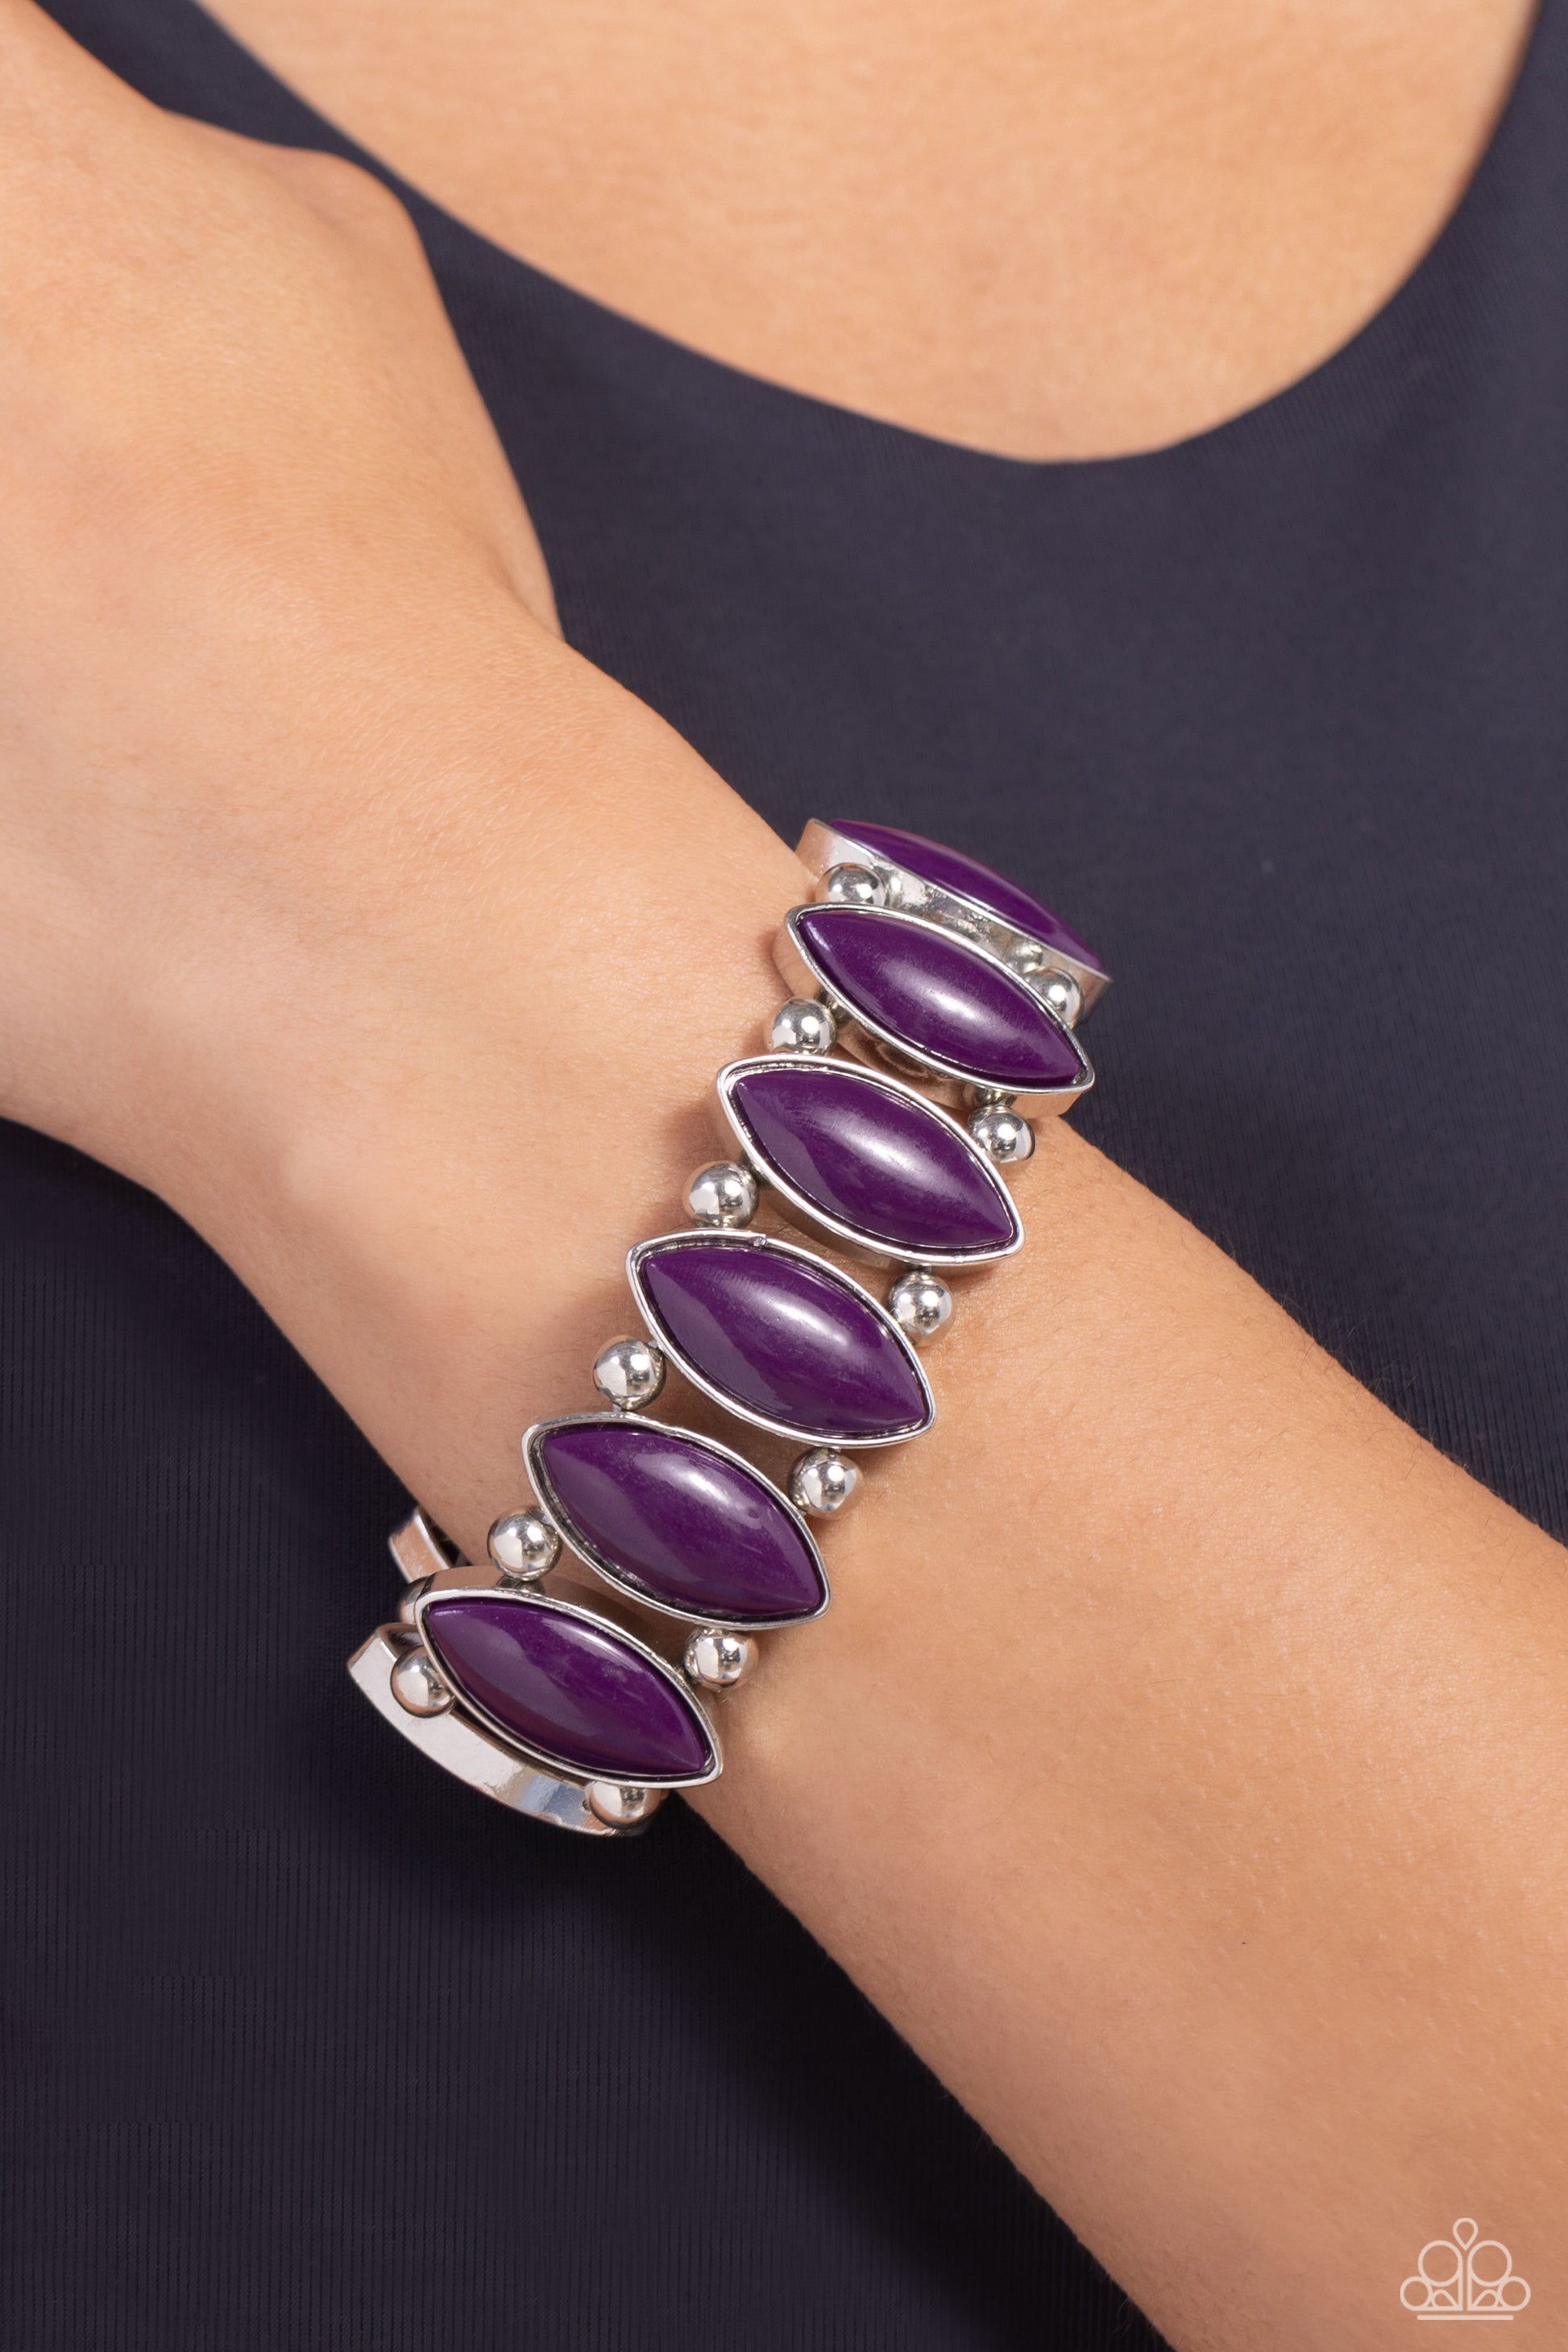 Paparazzi Accessories - Cry Me a Rivera - Purple Bracelframencased in sleek silver frames, oversized plum beaded frames alternate with pairs of classic silver beads along stretchy bands around the wrist for a vivacious pop of color.  Sold as one individual bracelet.